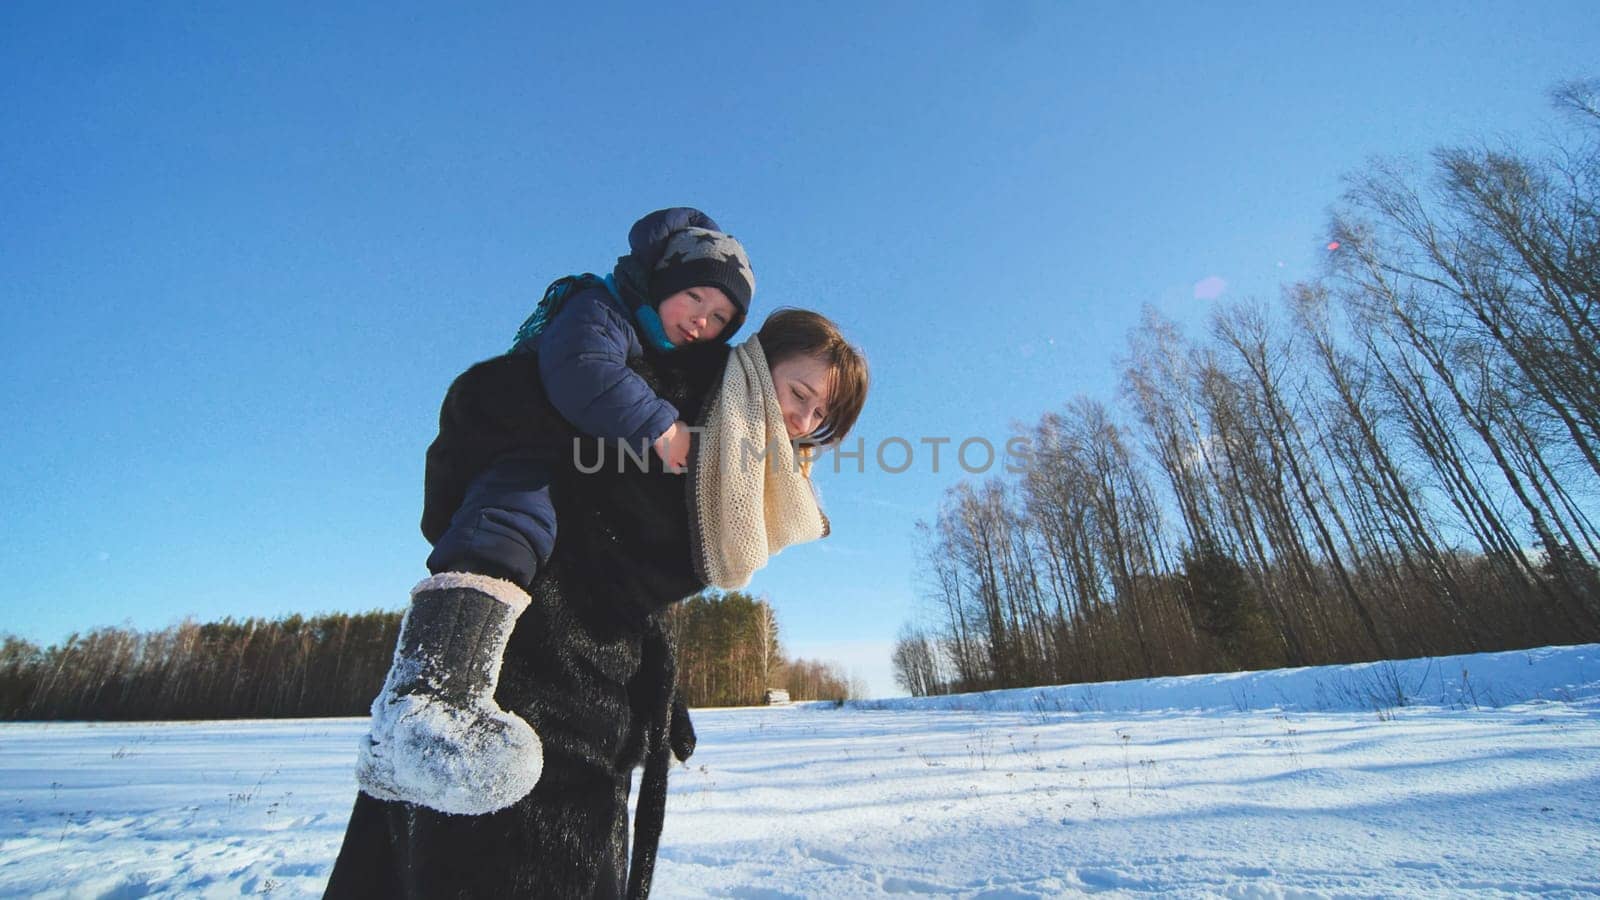 A mother carries her son across a field on her shoulders in winter